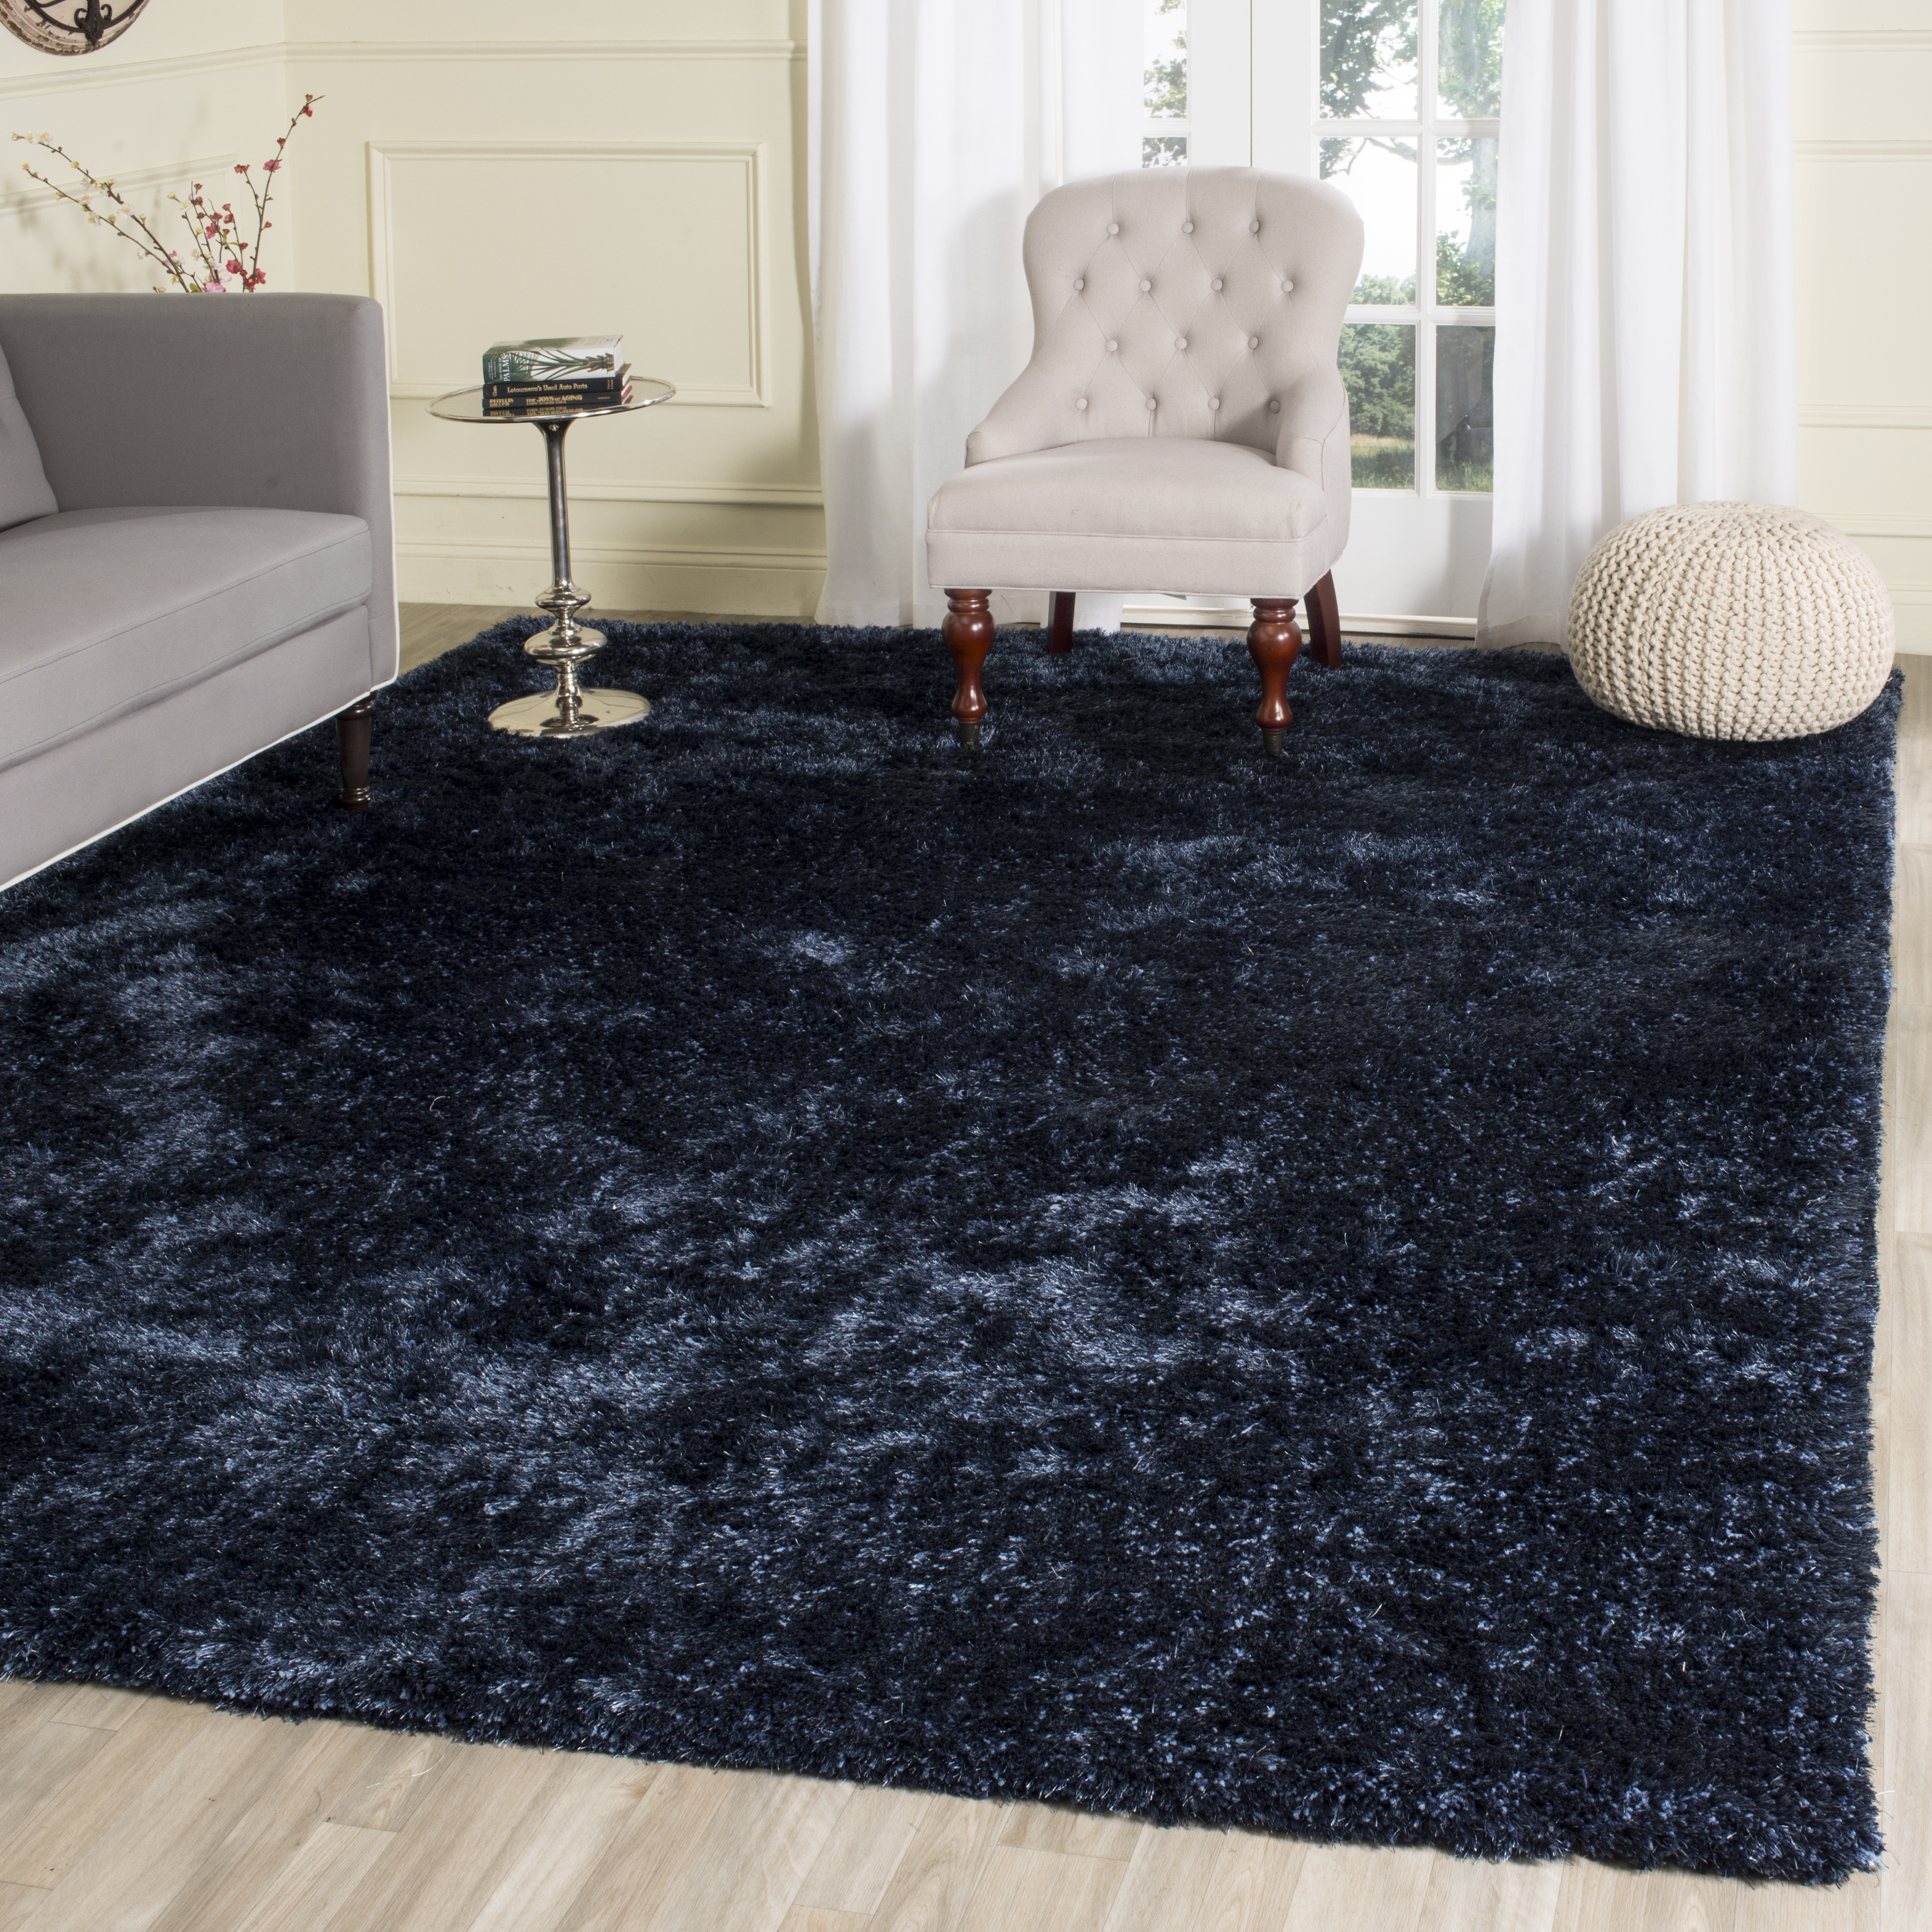 Arlo Home Hand Tufted Area Rug, SGT711D, Navy,  8' X 10' - Image 1